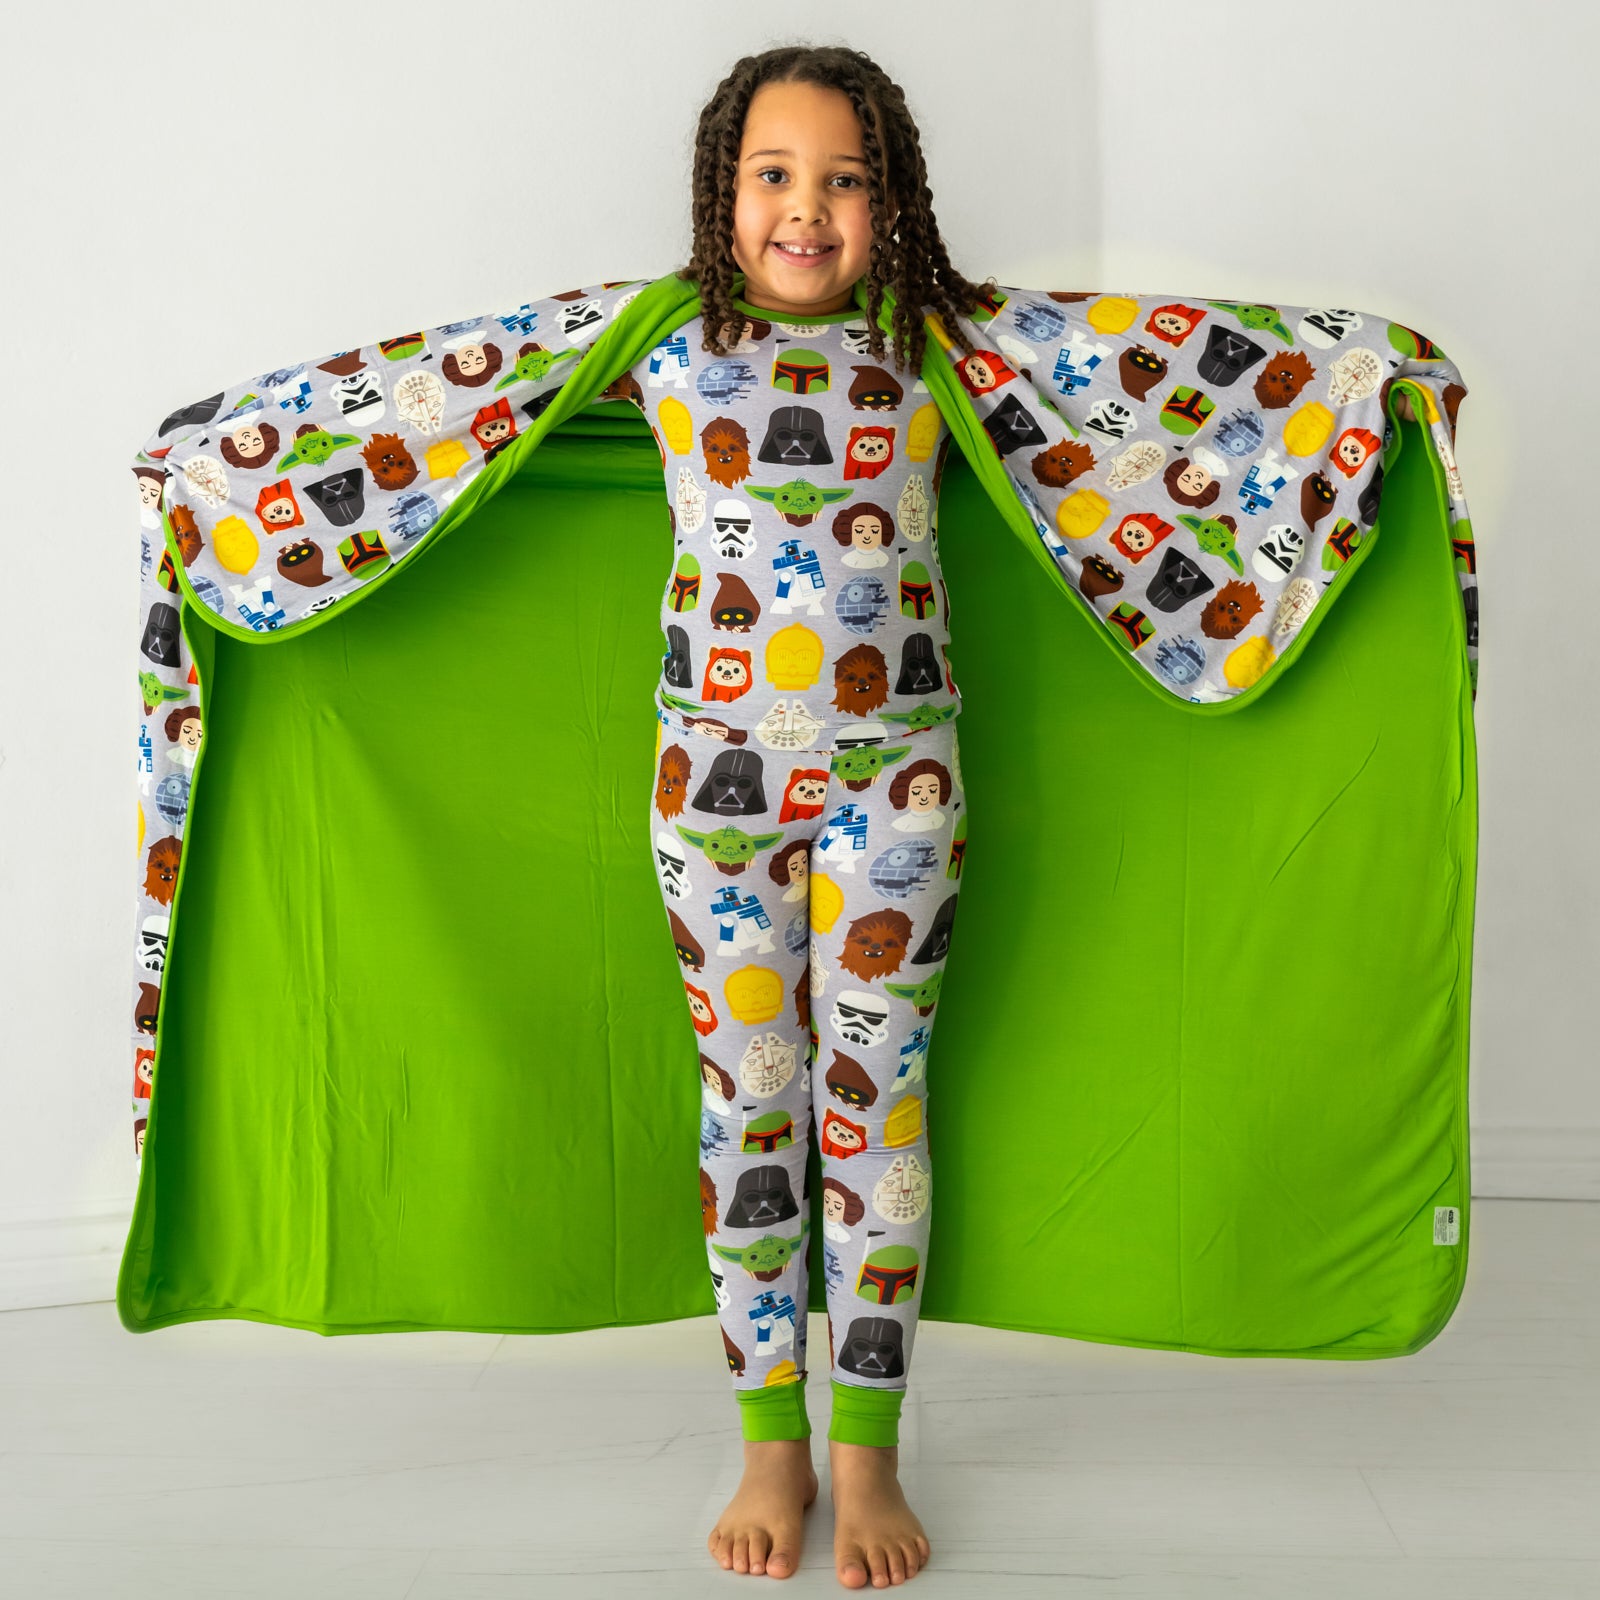 Child holding out a Legends of the Galaxy blanket behind her, detailing the solid green backing, and wearing matching pajamas